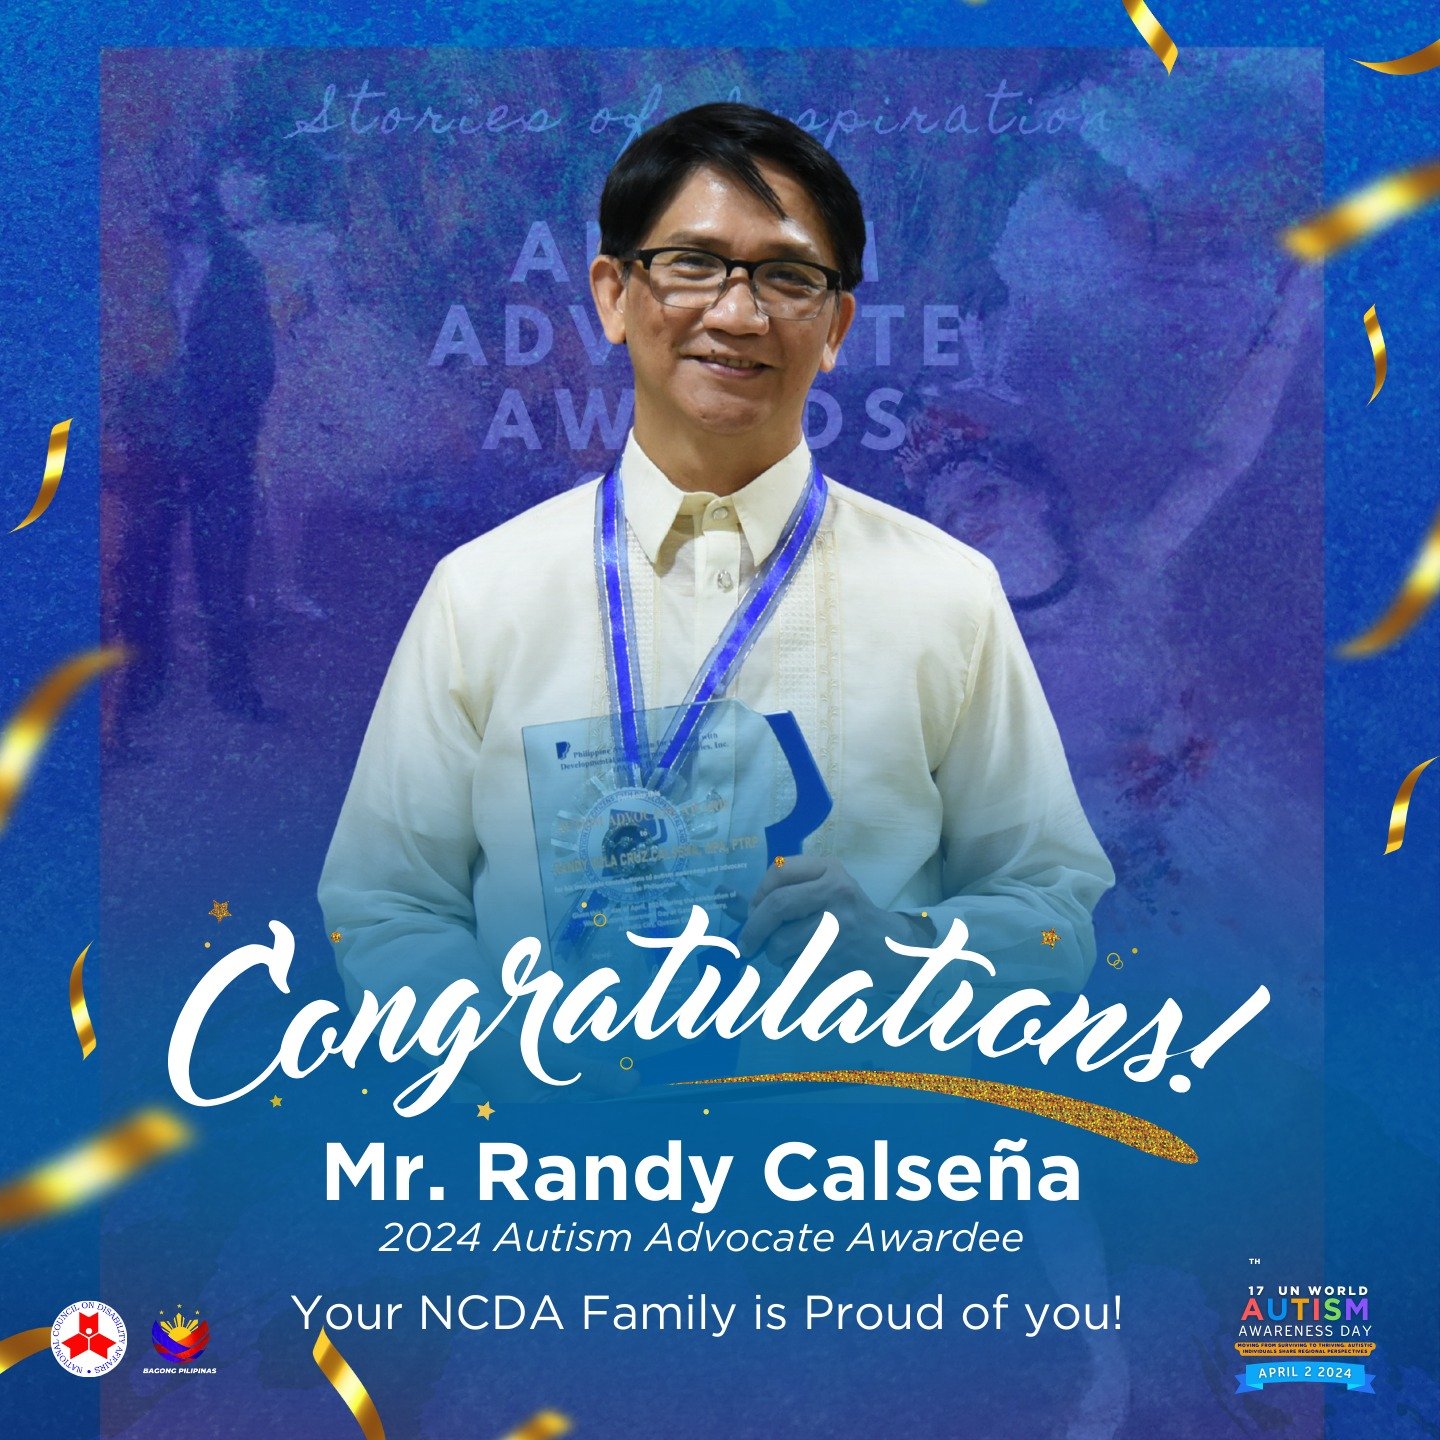 Poster congratulating Mr. Randy Calsena as one of the 2024 Autism Advocate Awardee during 17th UN World Autism Awareness day.